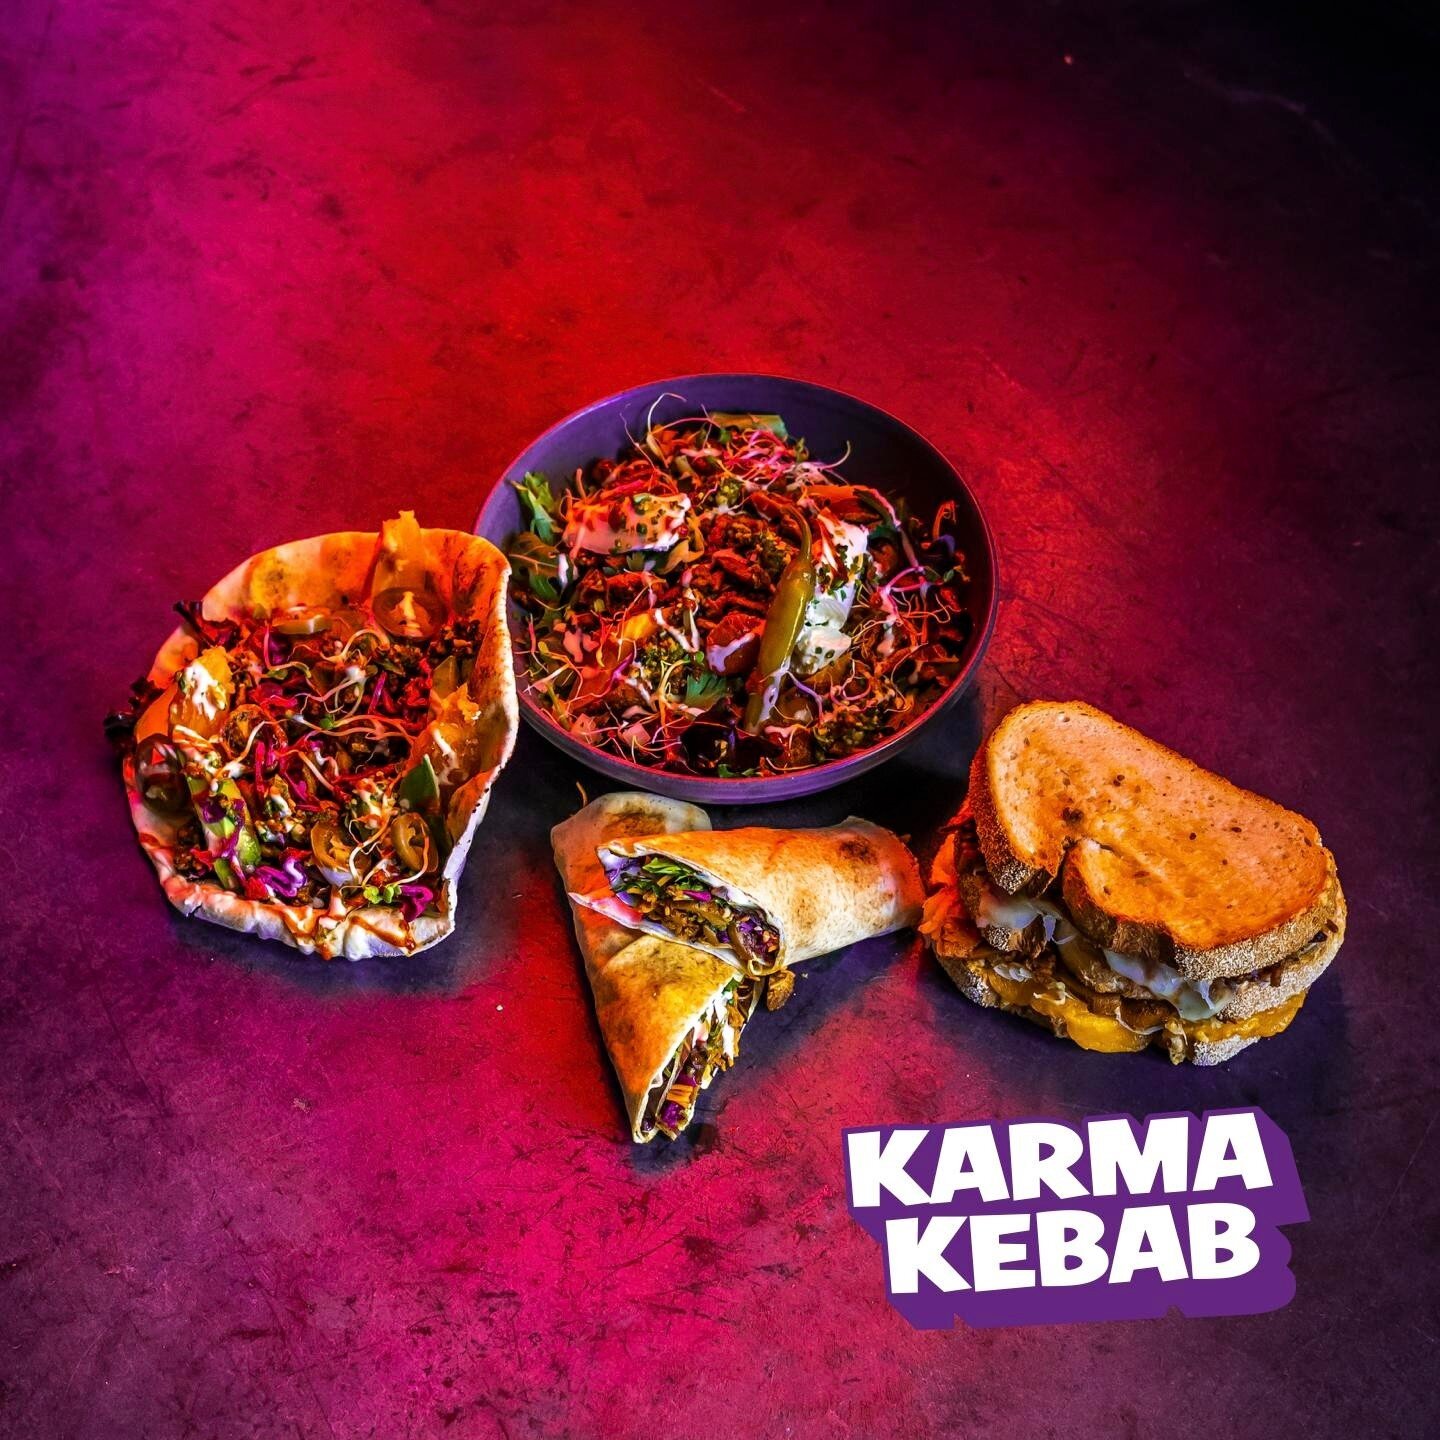 Did you order your ready-to-eat portion good karma already? Now also available in Haarlem! We partnered up with @jopentaproom to deliver our delicious meals to your doorstep 🙌 🥙 #ubereats #deliveroo #linkinbio Thursday - Sunday #amsterdam #haarlem 